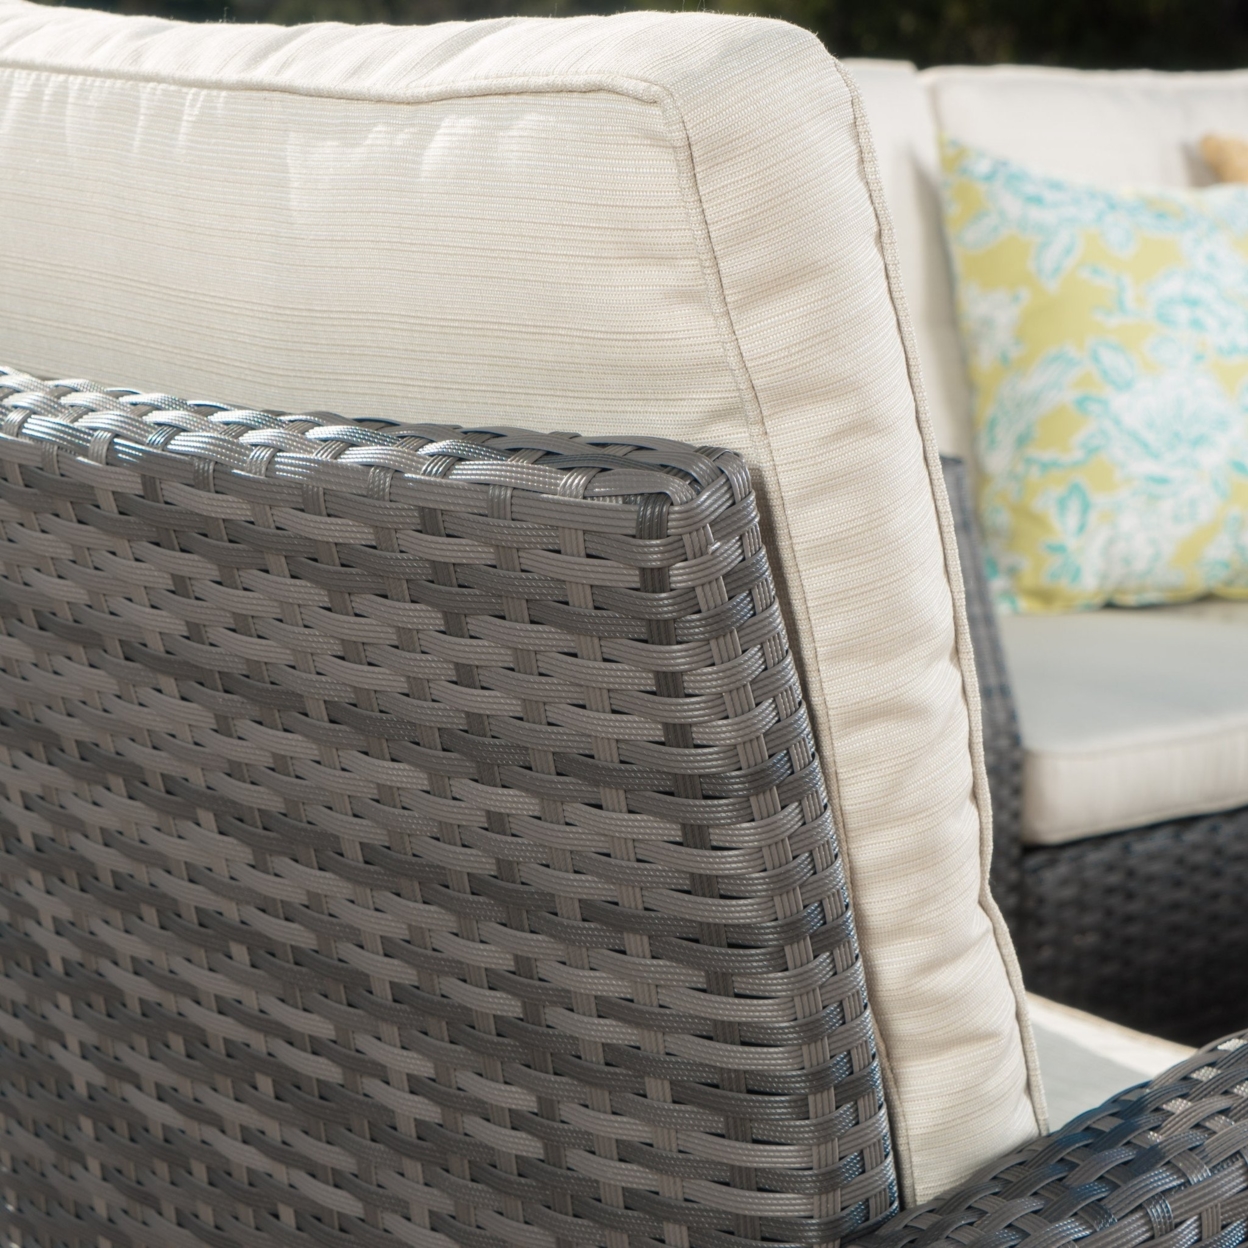 Del Norte 4pc Outdoor Gray Wicker Sofa Seating Set With Cushions